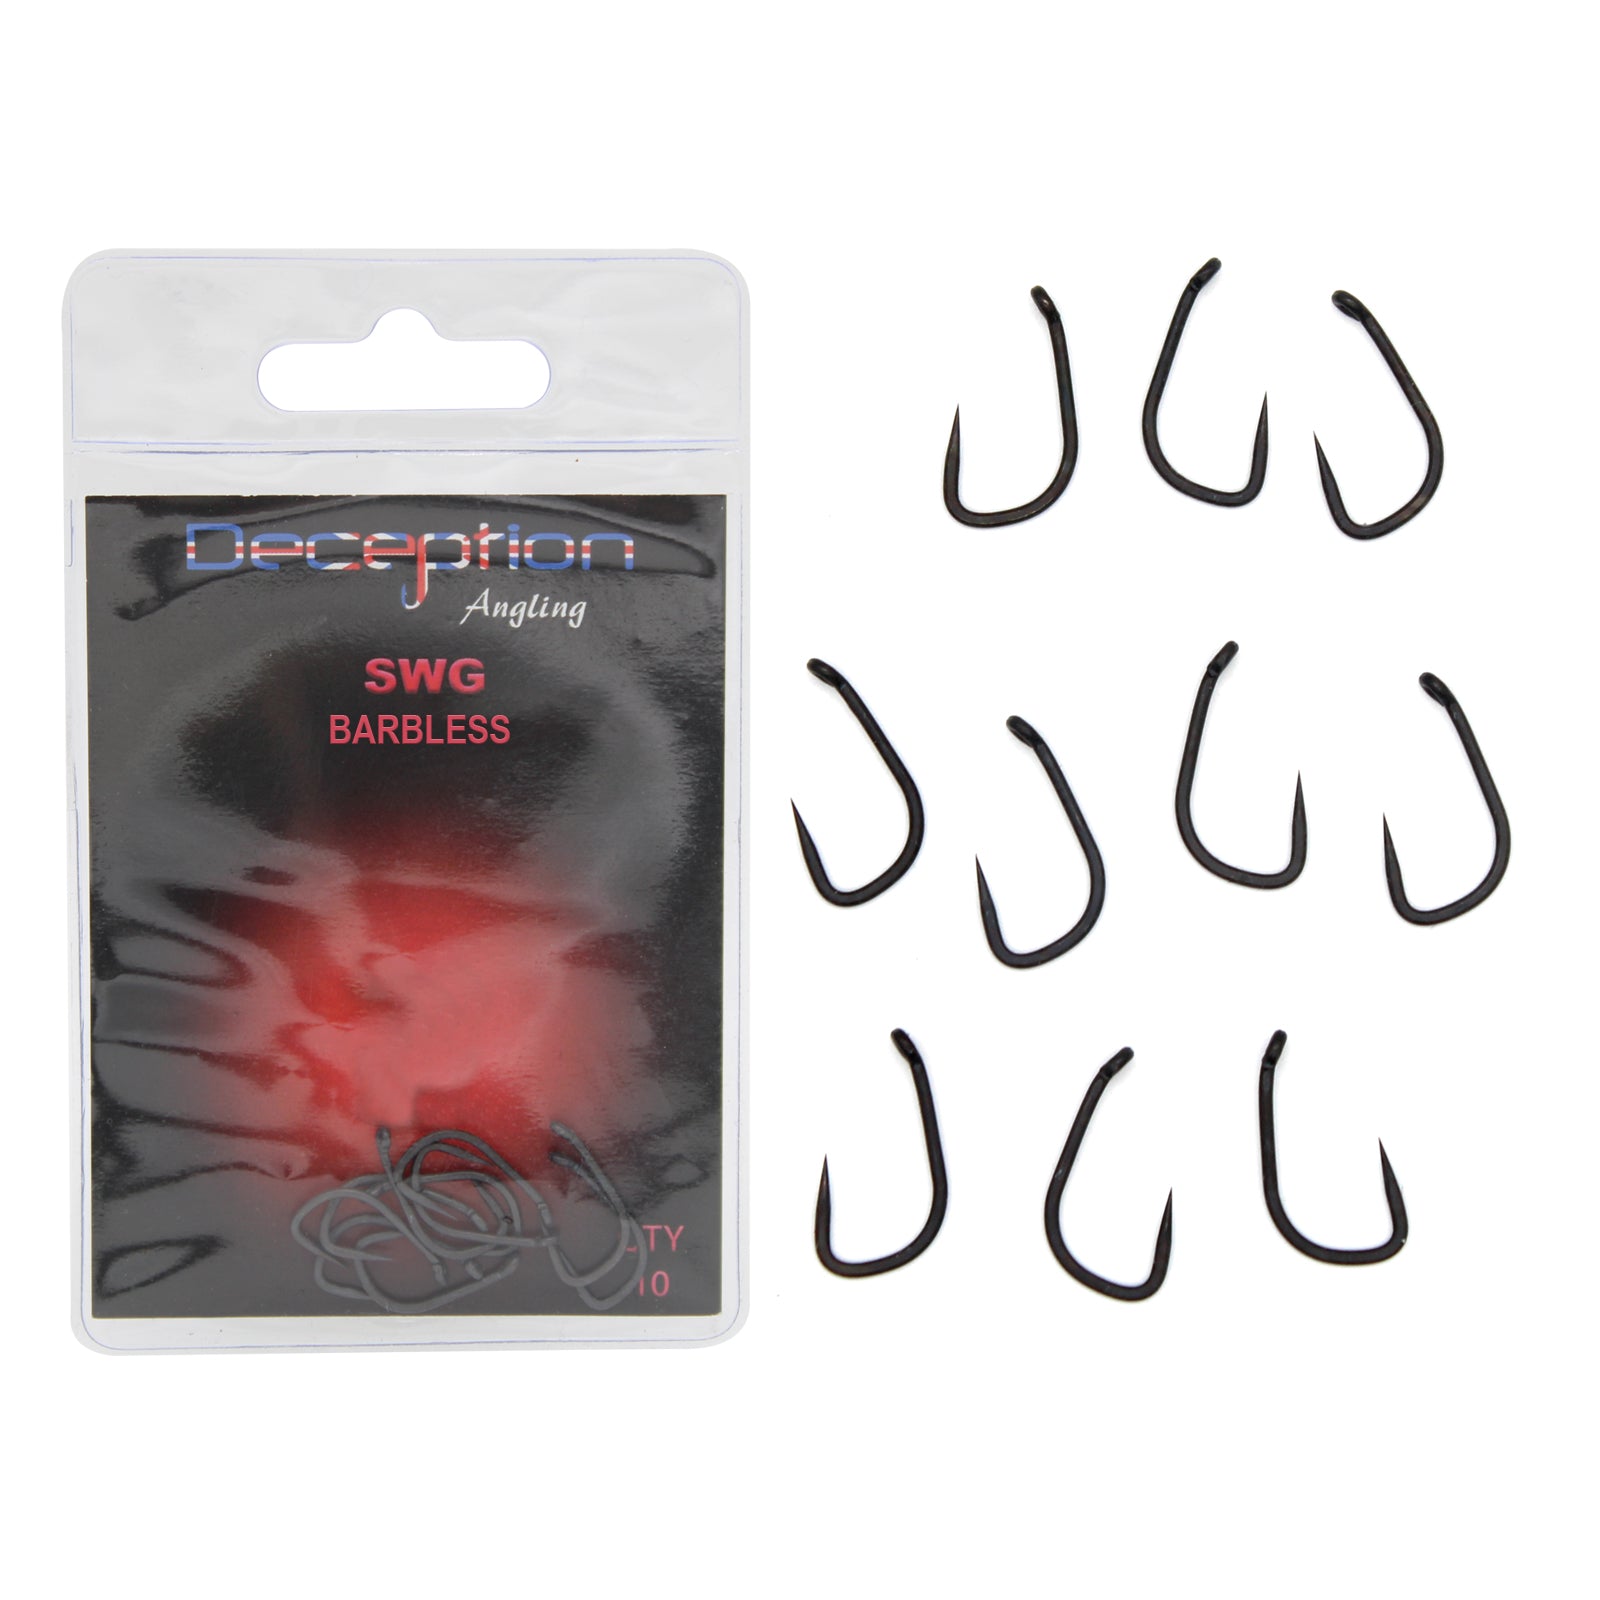 Deception Angling SWG Barbless Pack of 10